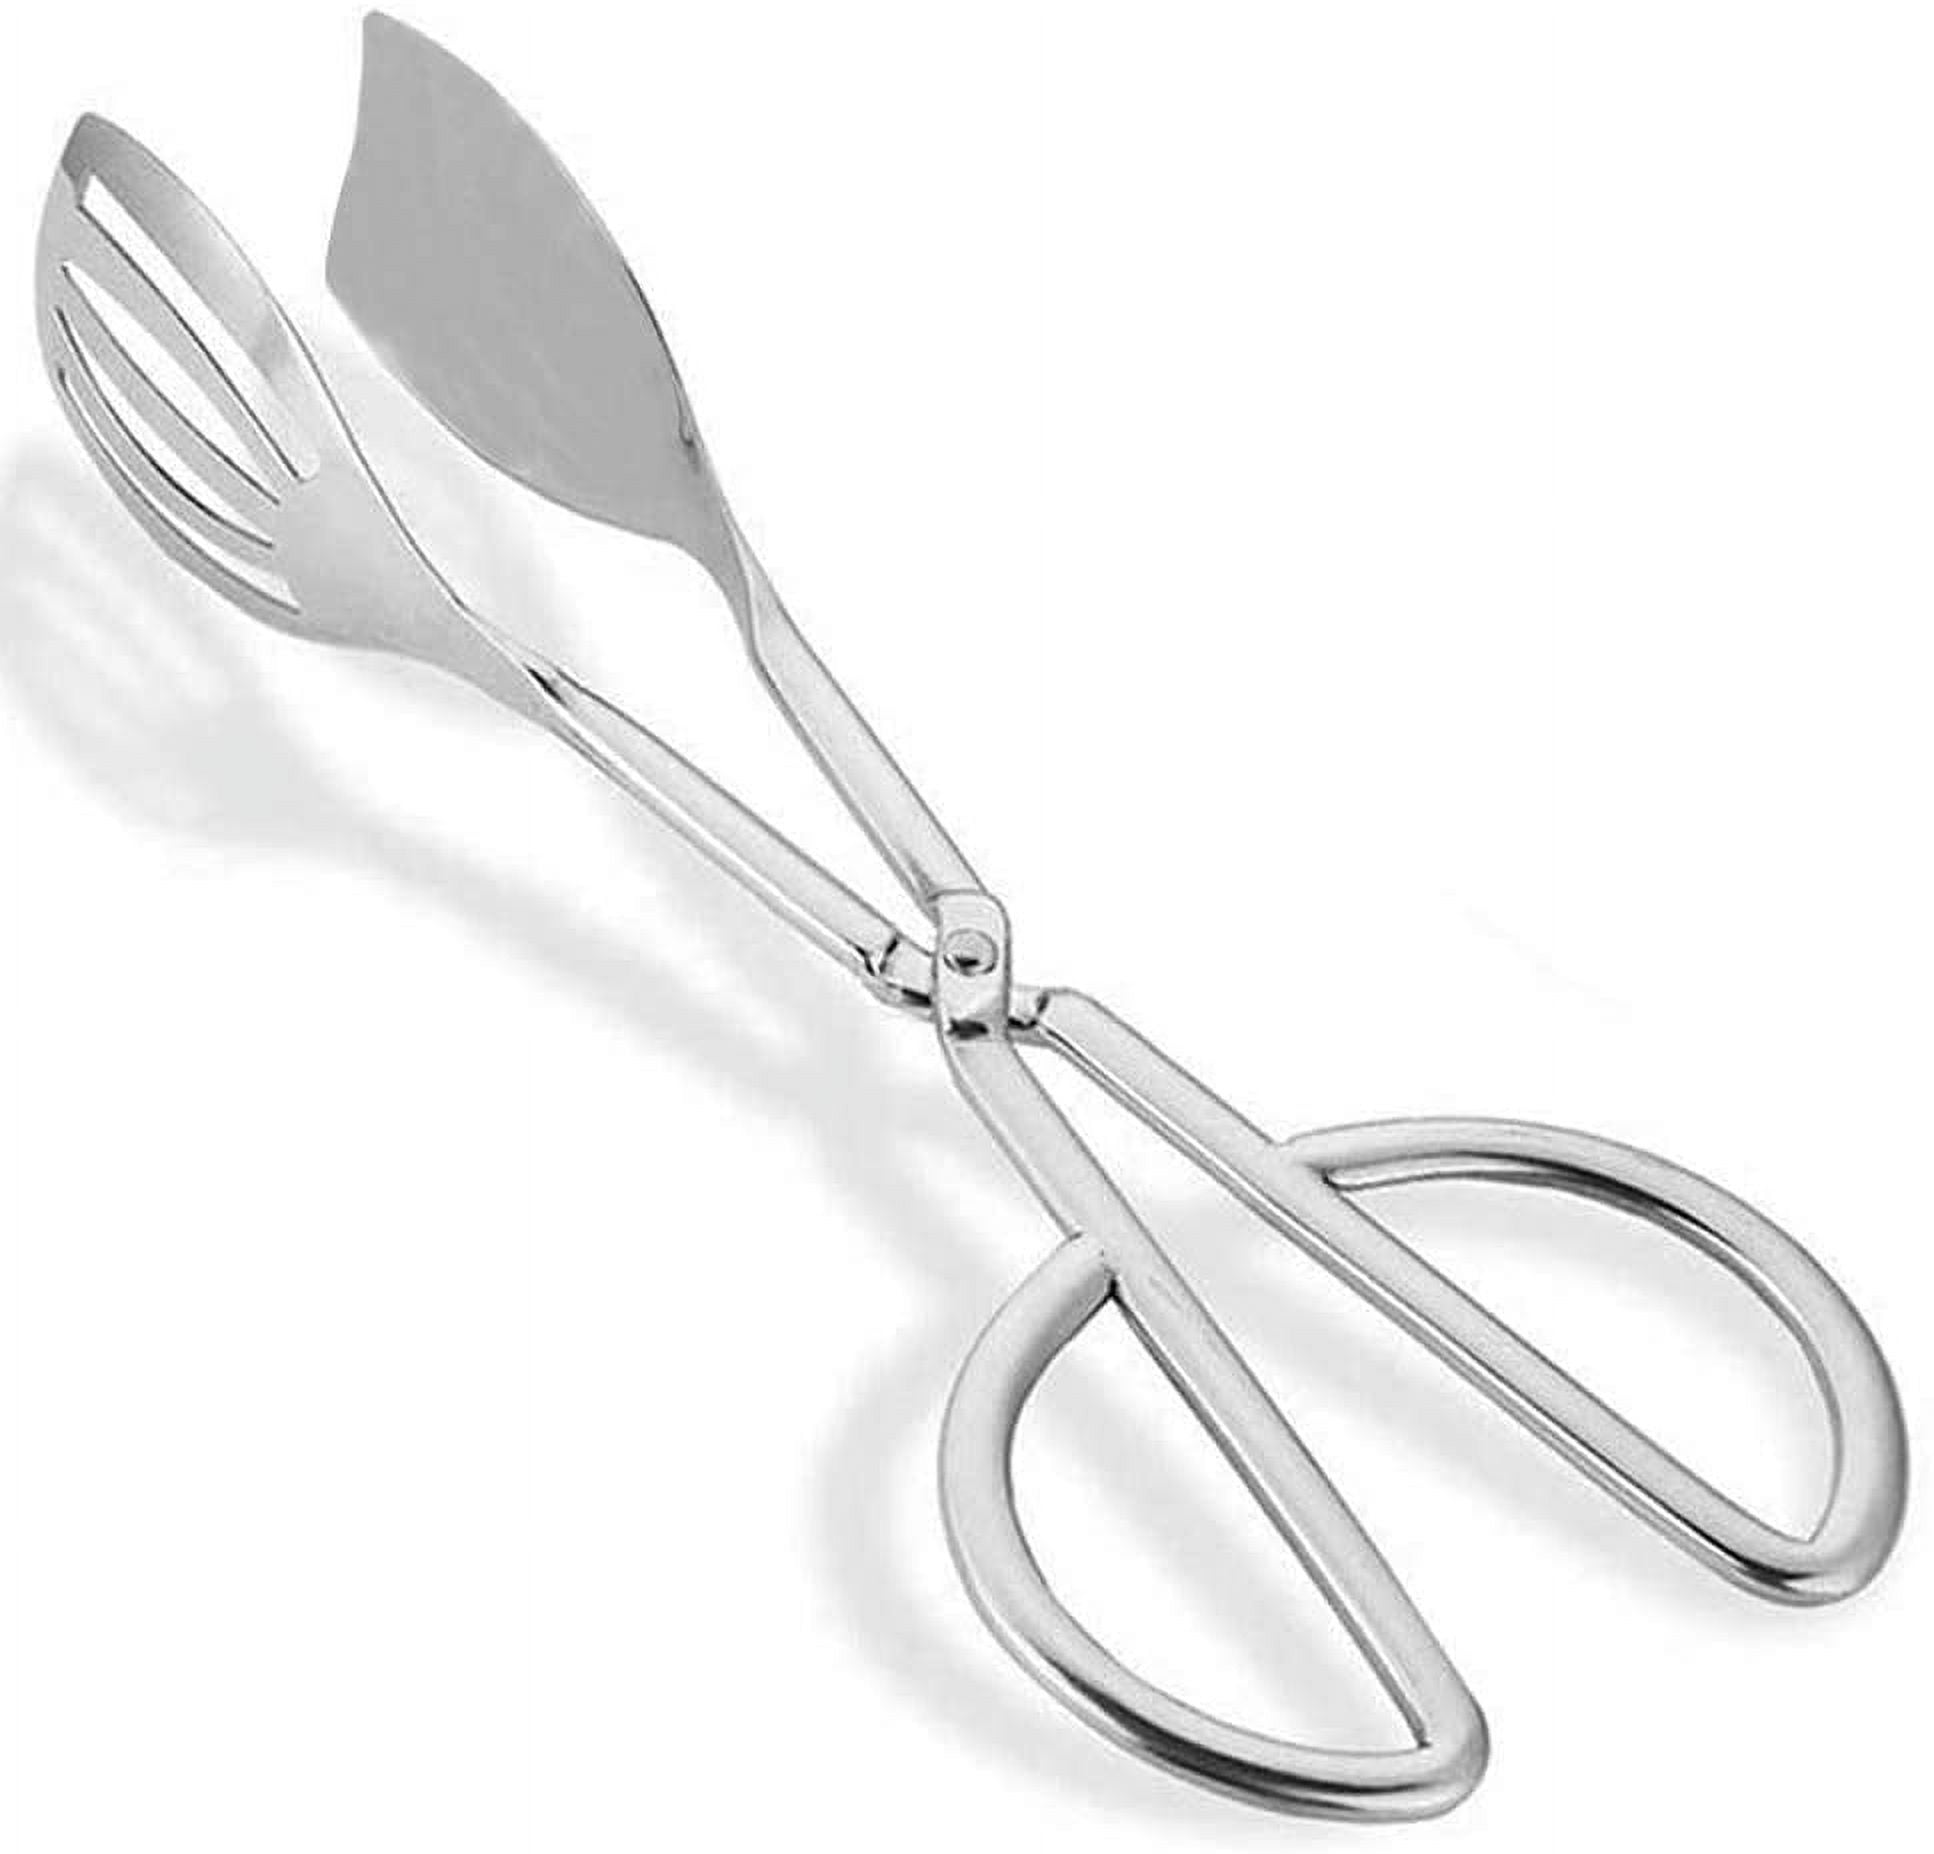 Z Grills Stainless Steel Heavy-Duty Kitchen Tongs, Salad Tongs